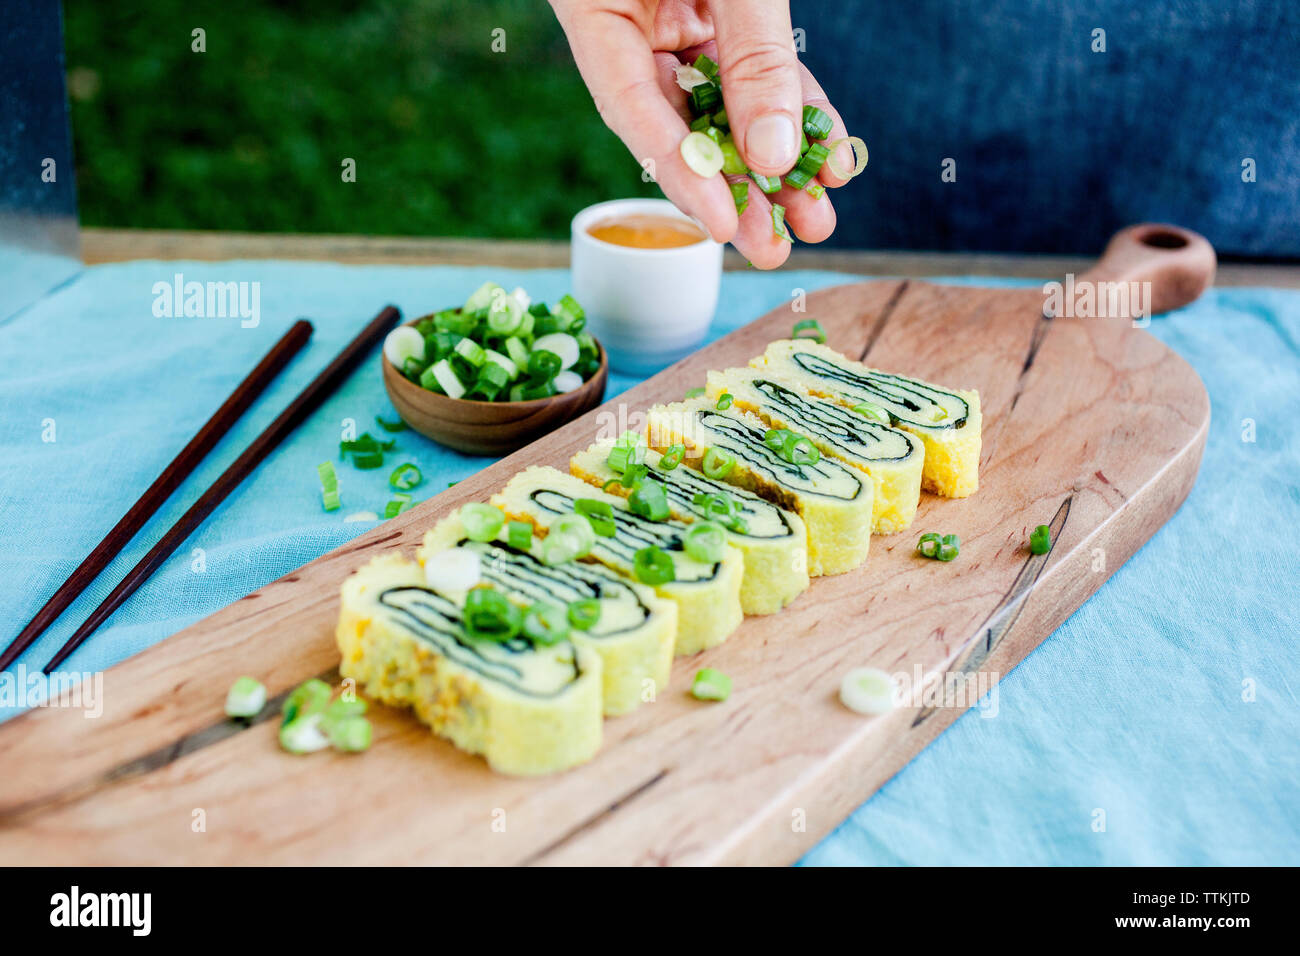 Cropped hand of female chef garnishing baked pastry item on serving board in commercial kitchen Stock Photo